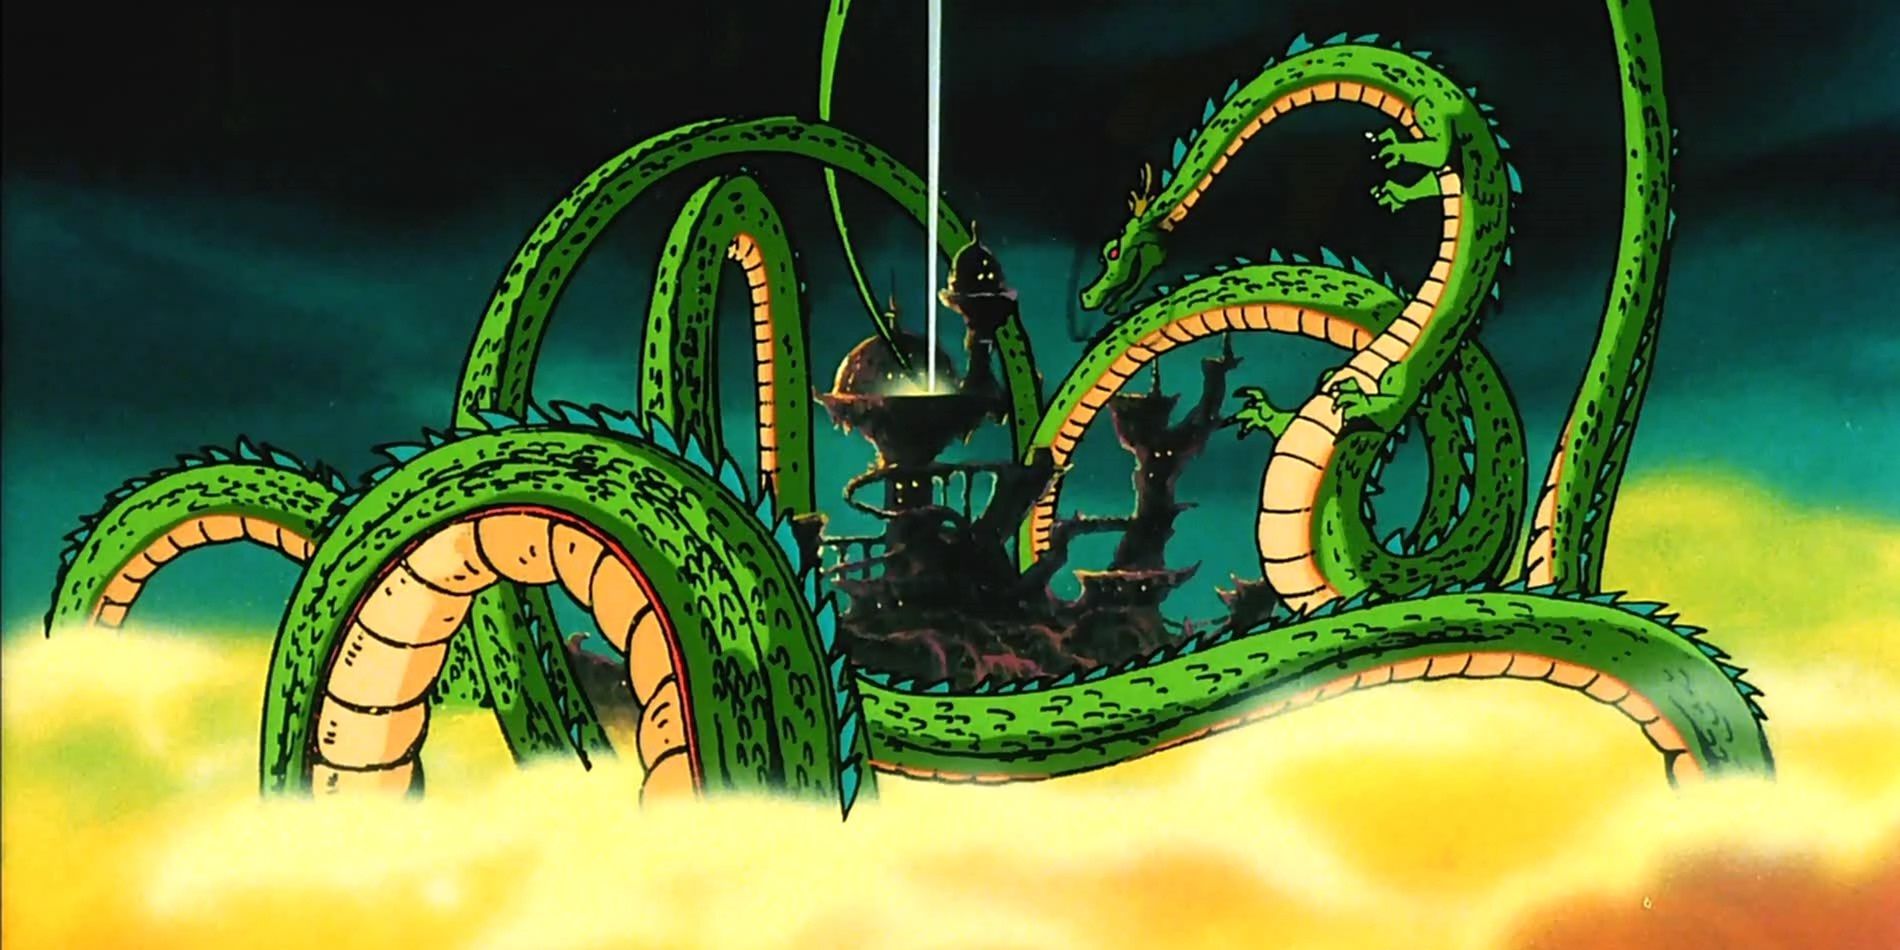 Dragon Ball Z Shenron appears to grant a wish